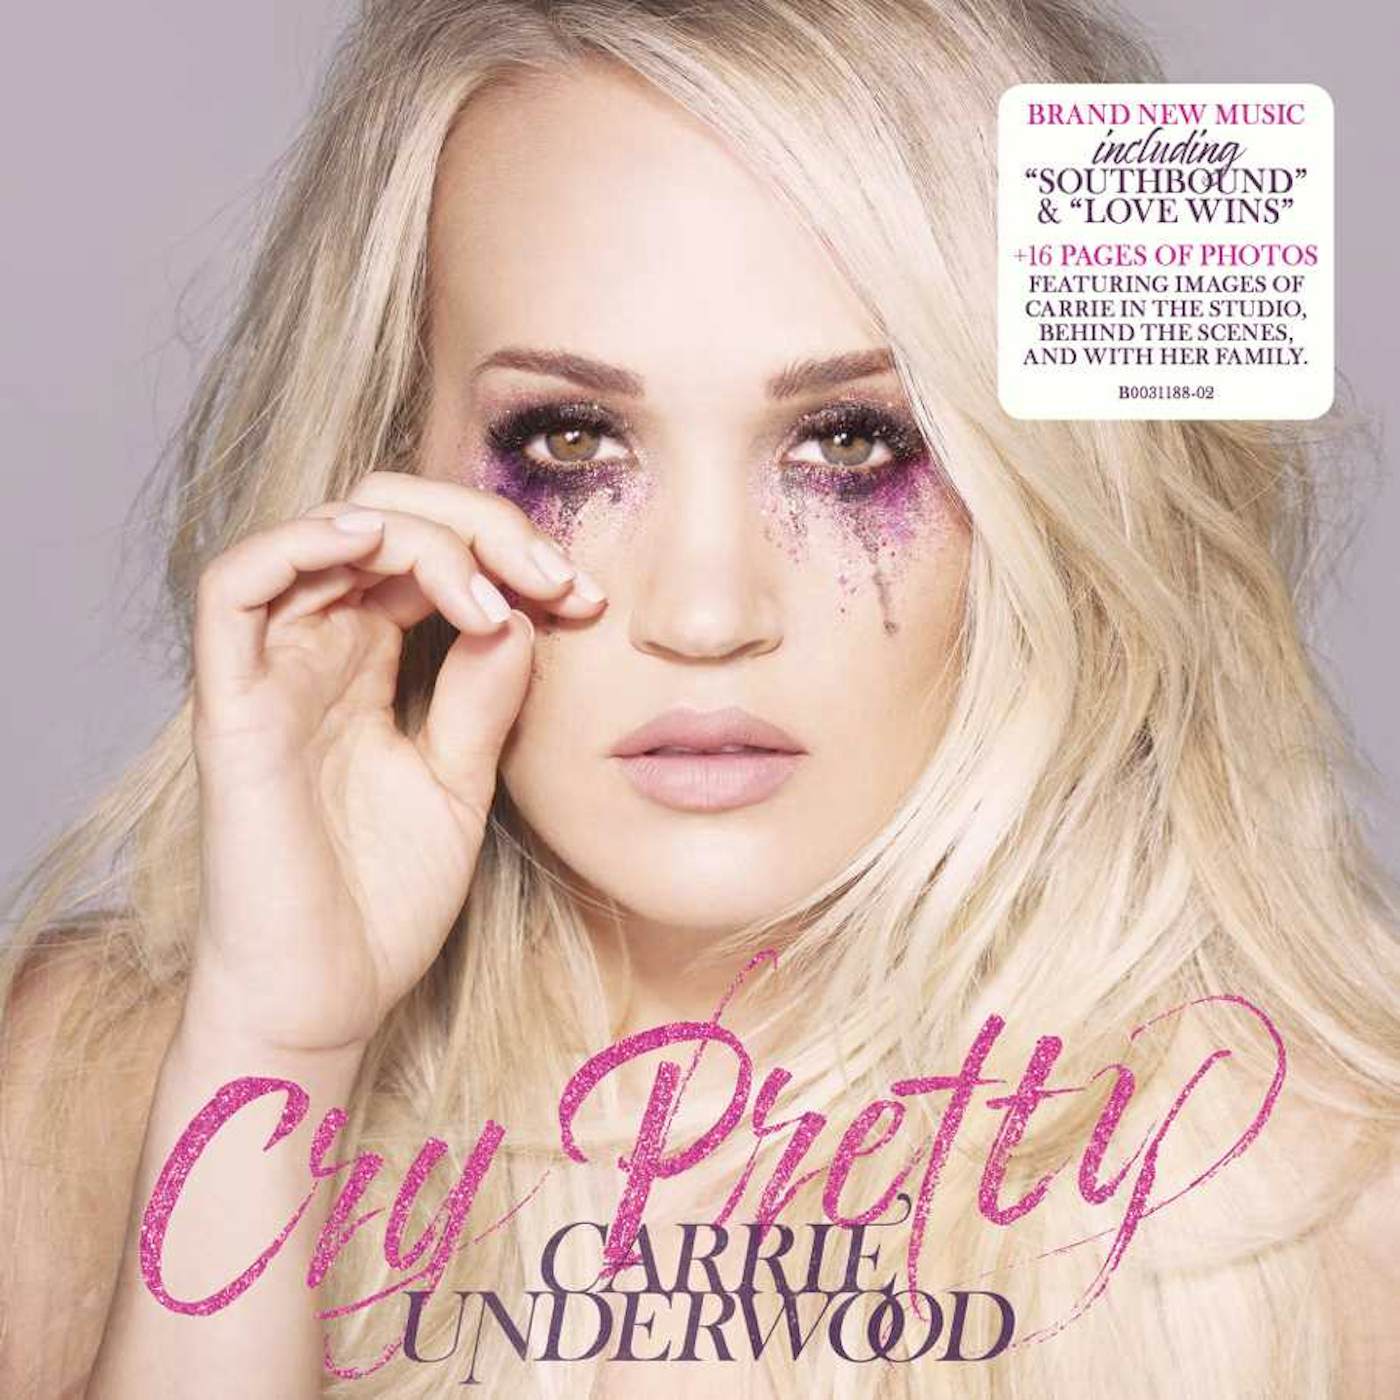 Carrie Underwood CRY PRETTY (PICUTRE BOOK CD) CD